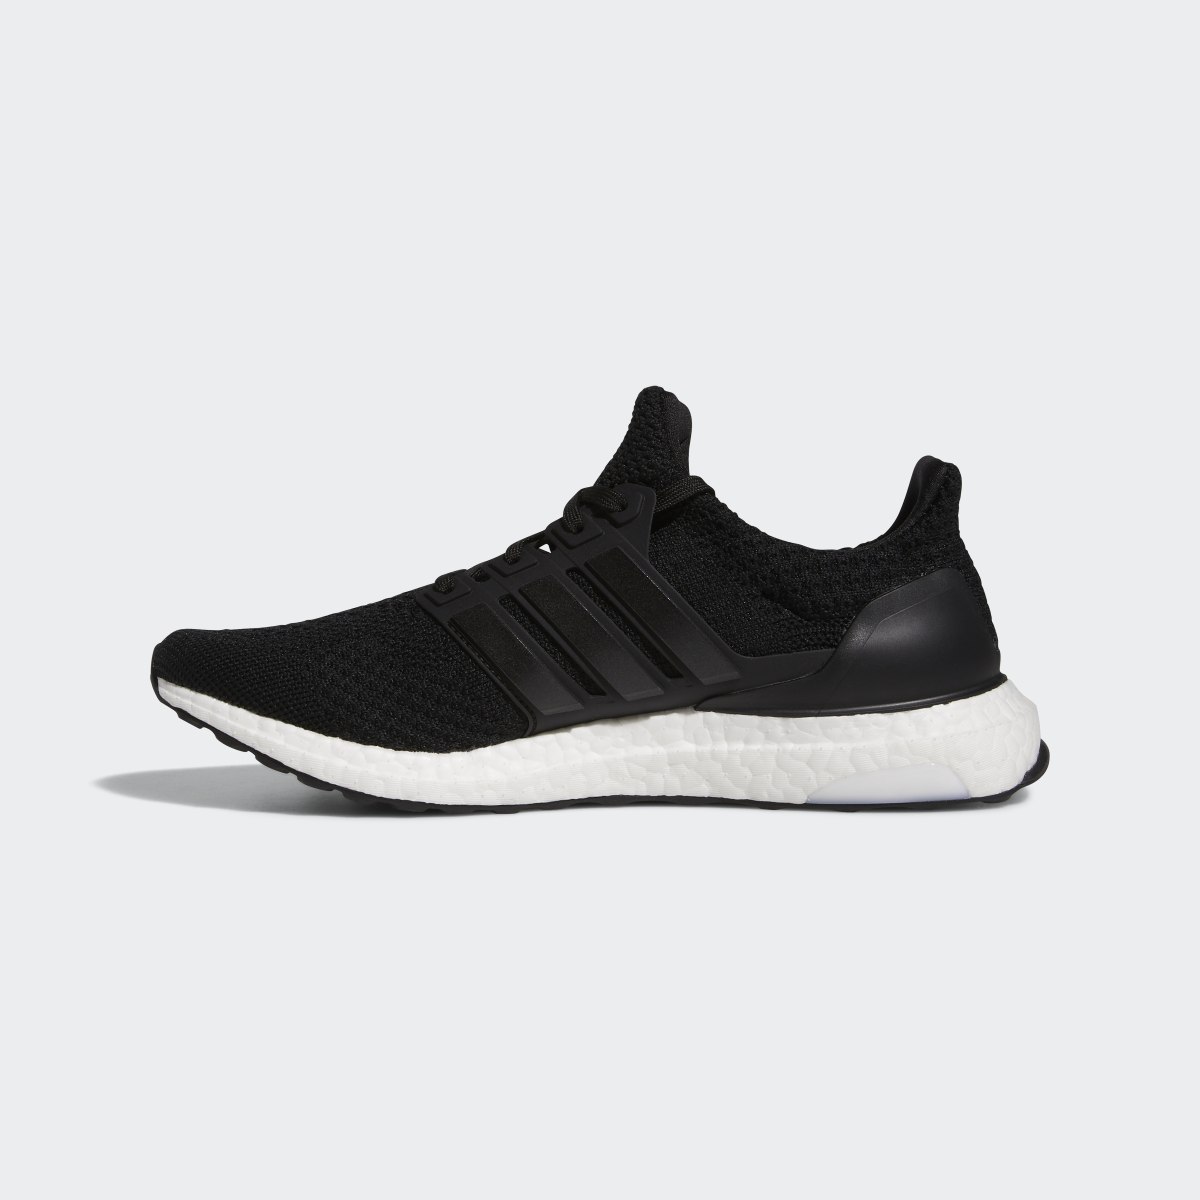 Adidas Ultraboost 5.0 DNA Shoes. 10